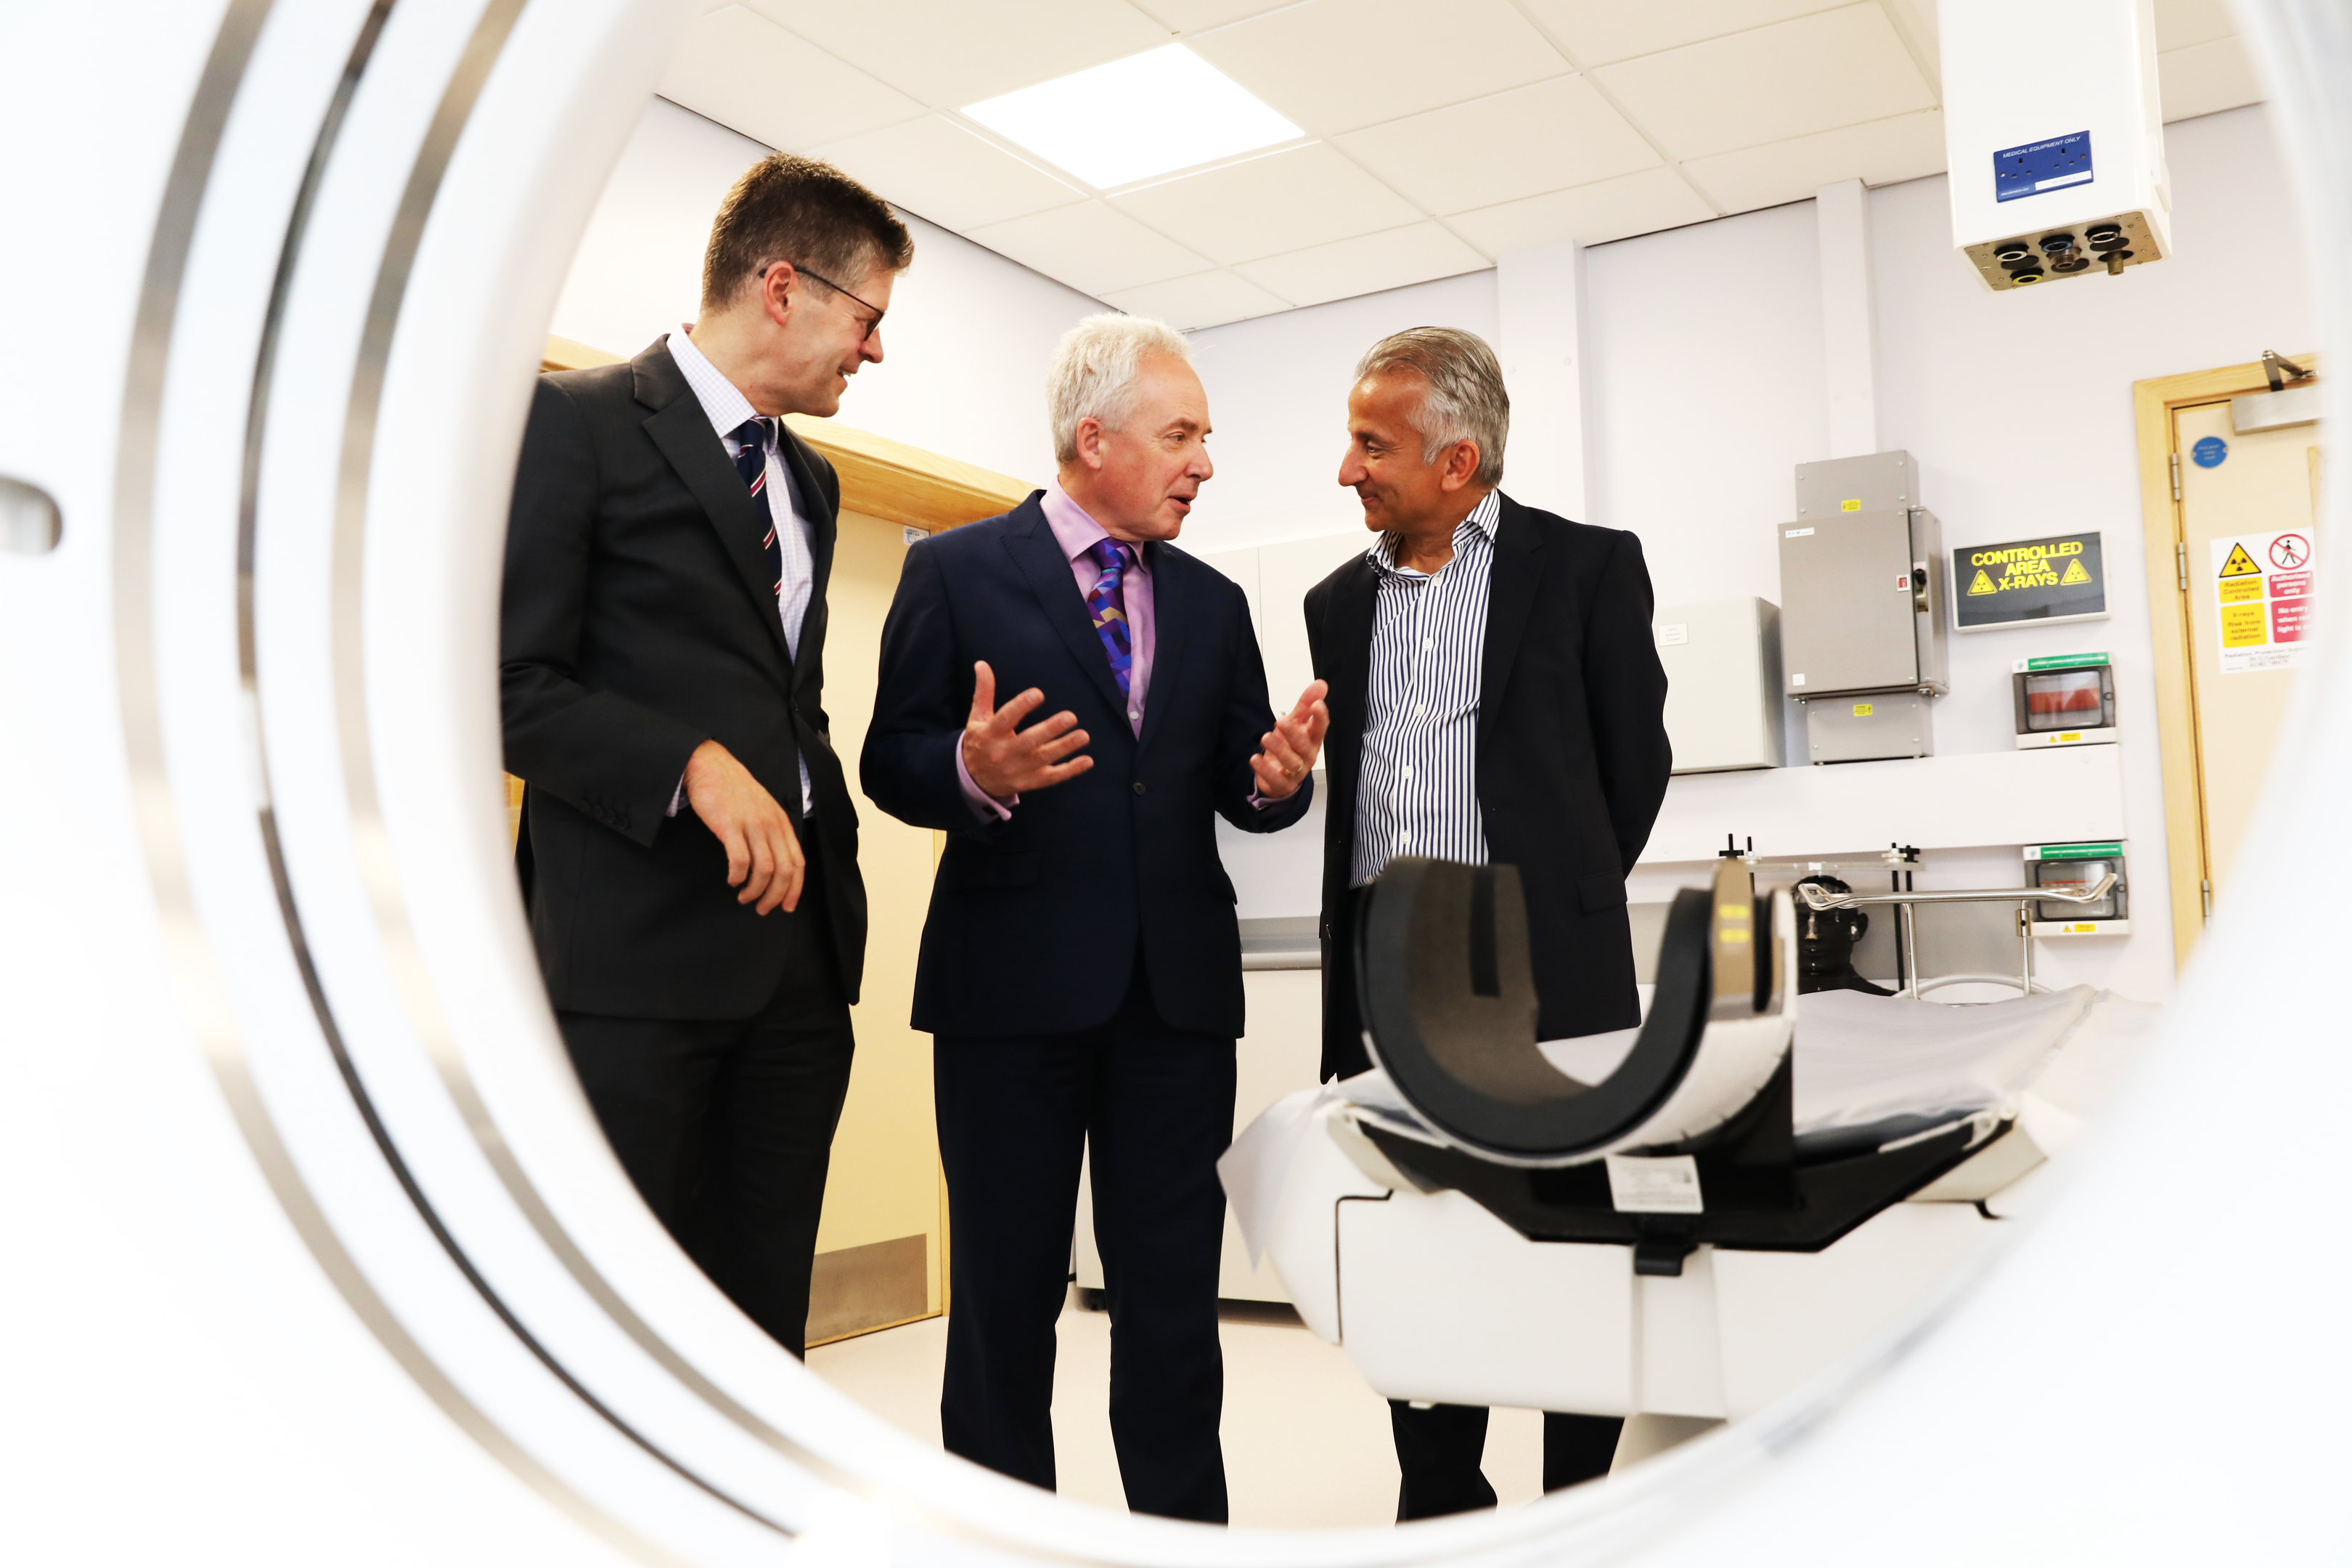 Rory McCrimmon, Dean of the School of Medicine, Chief Executive Malcolm Wright and Professor Dilip Nathwani, Co-Director of AHSP (Academic Health  and Science Partnership) with the new CT Scanner.